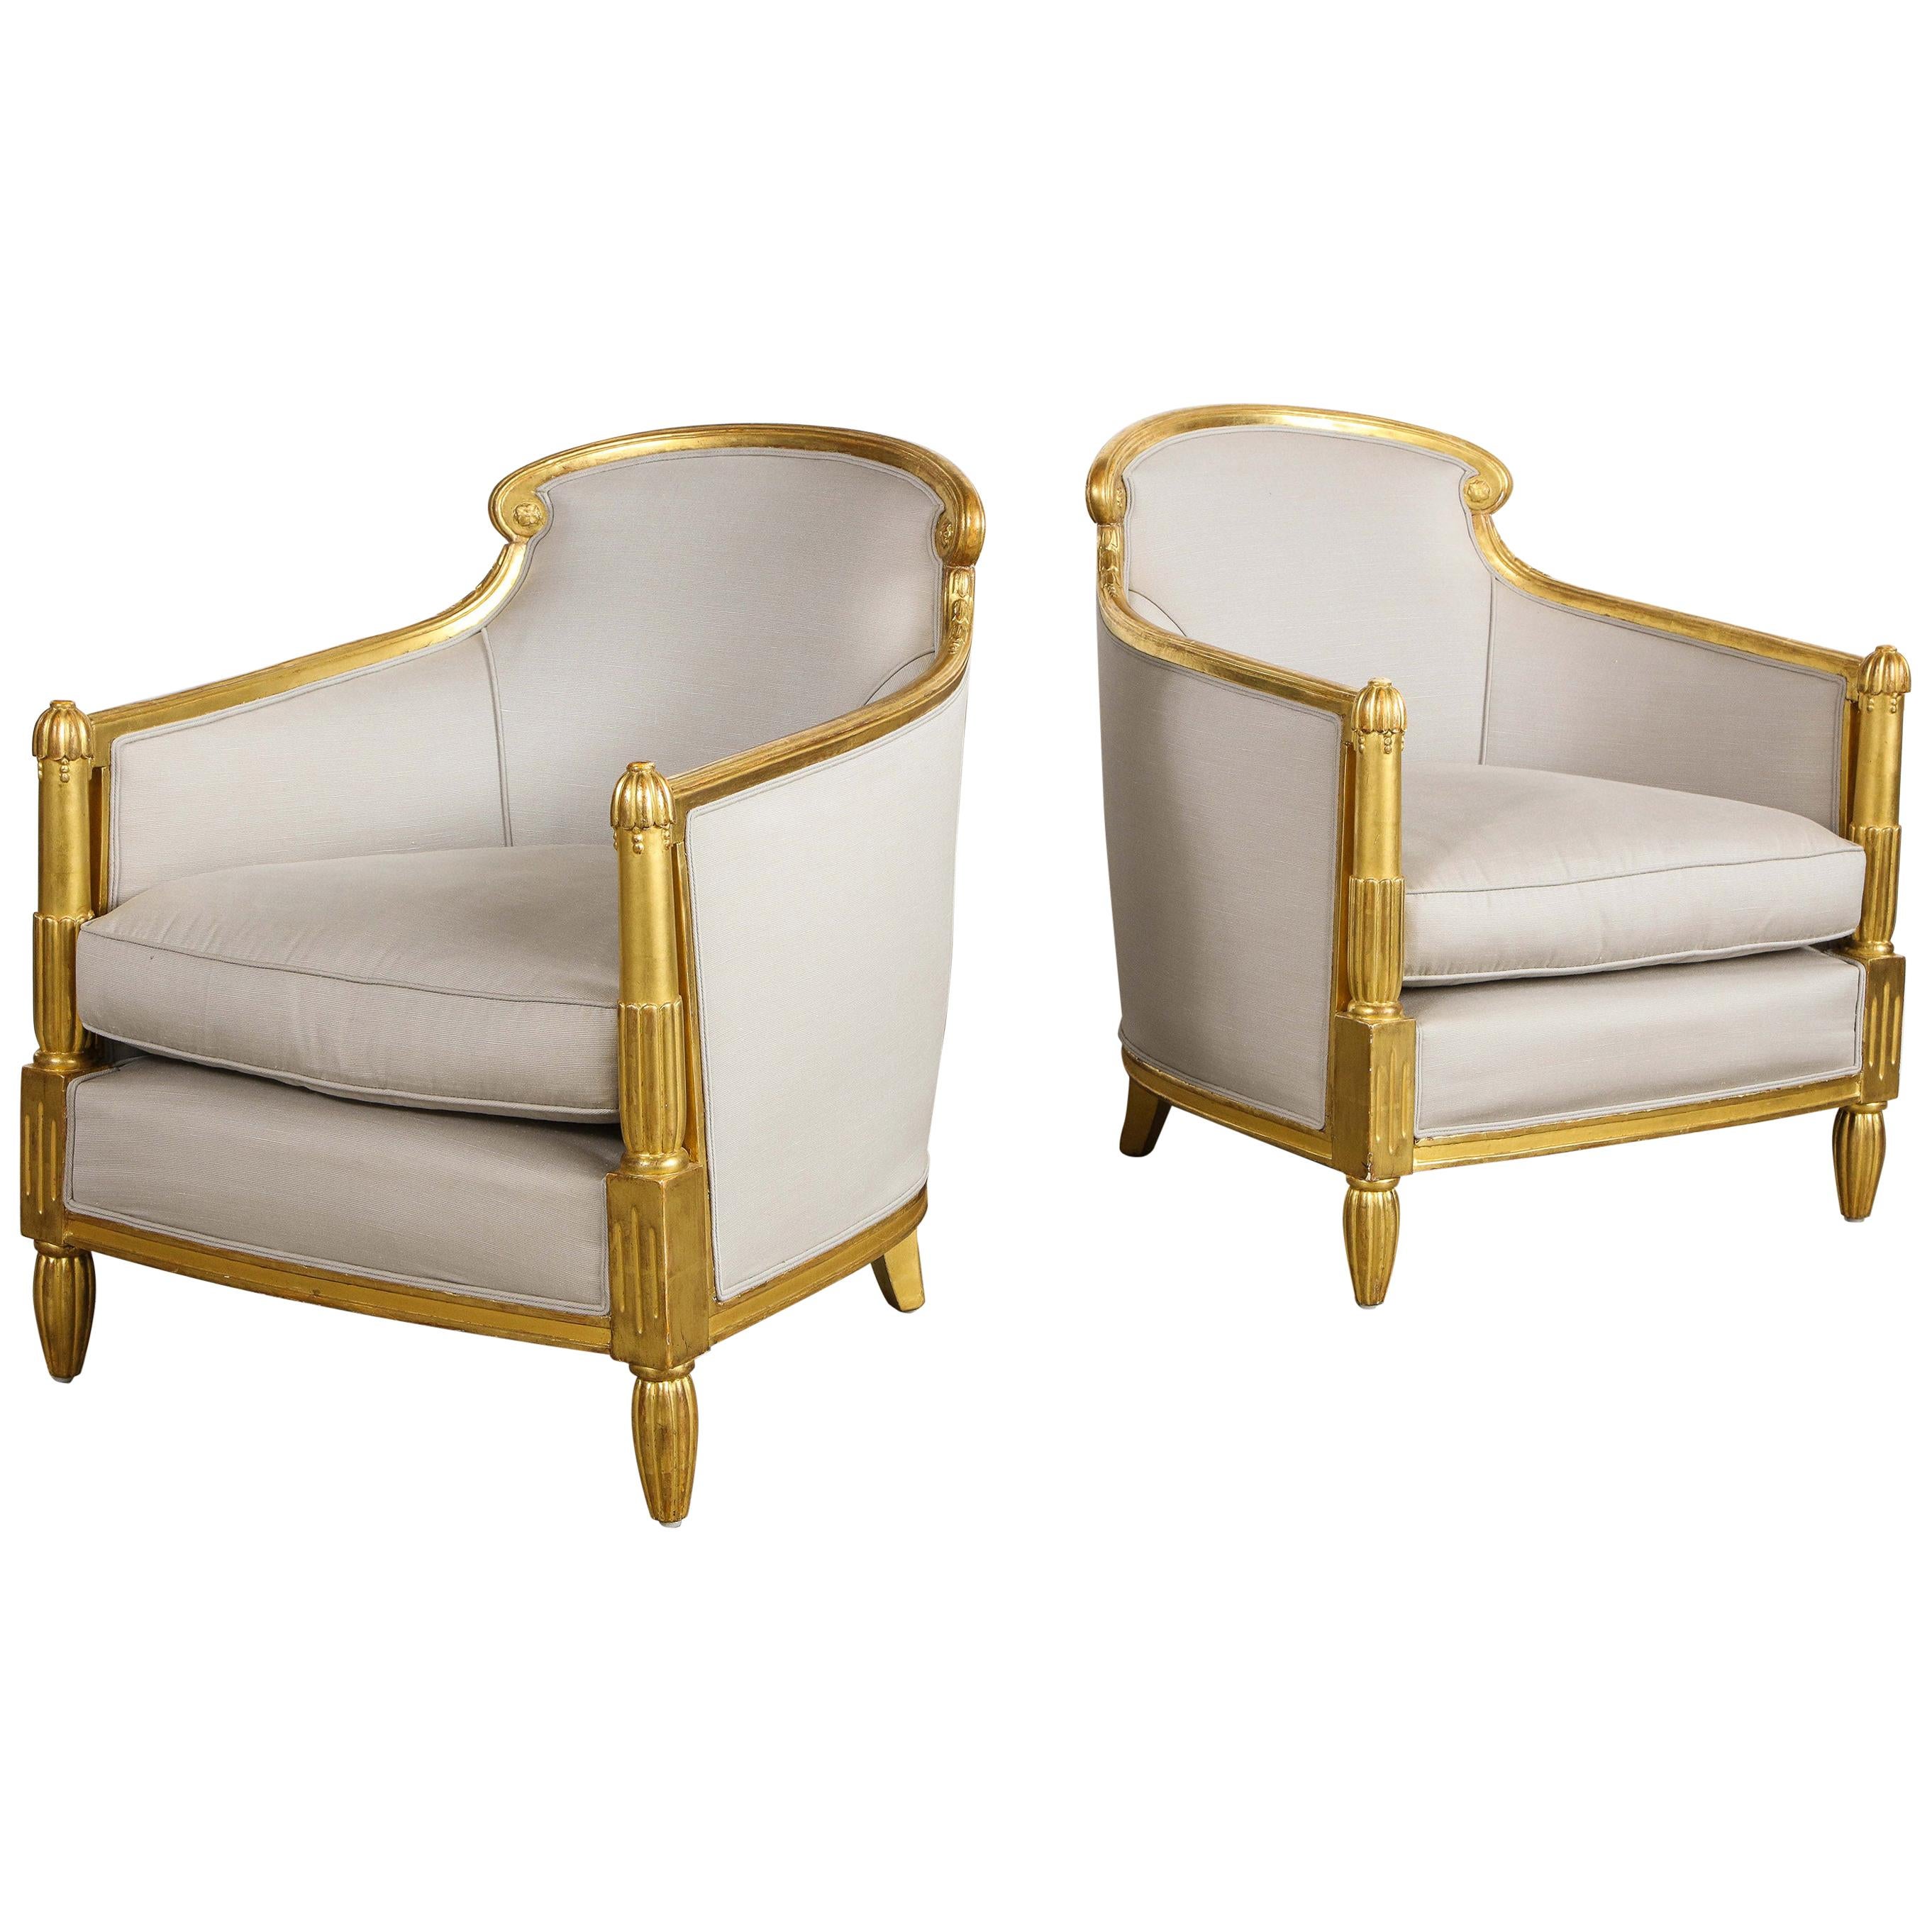 Pair of Bergeres Attributed to Sue et Mare